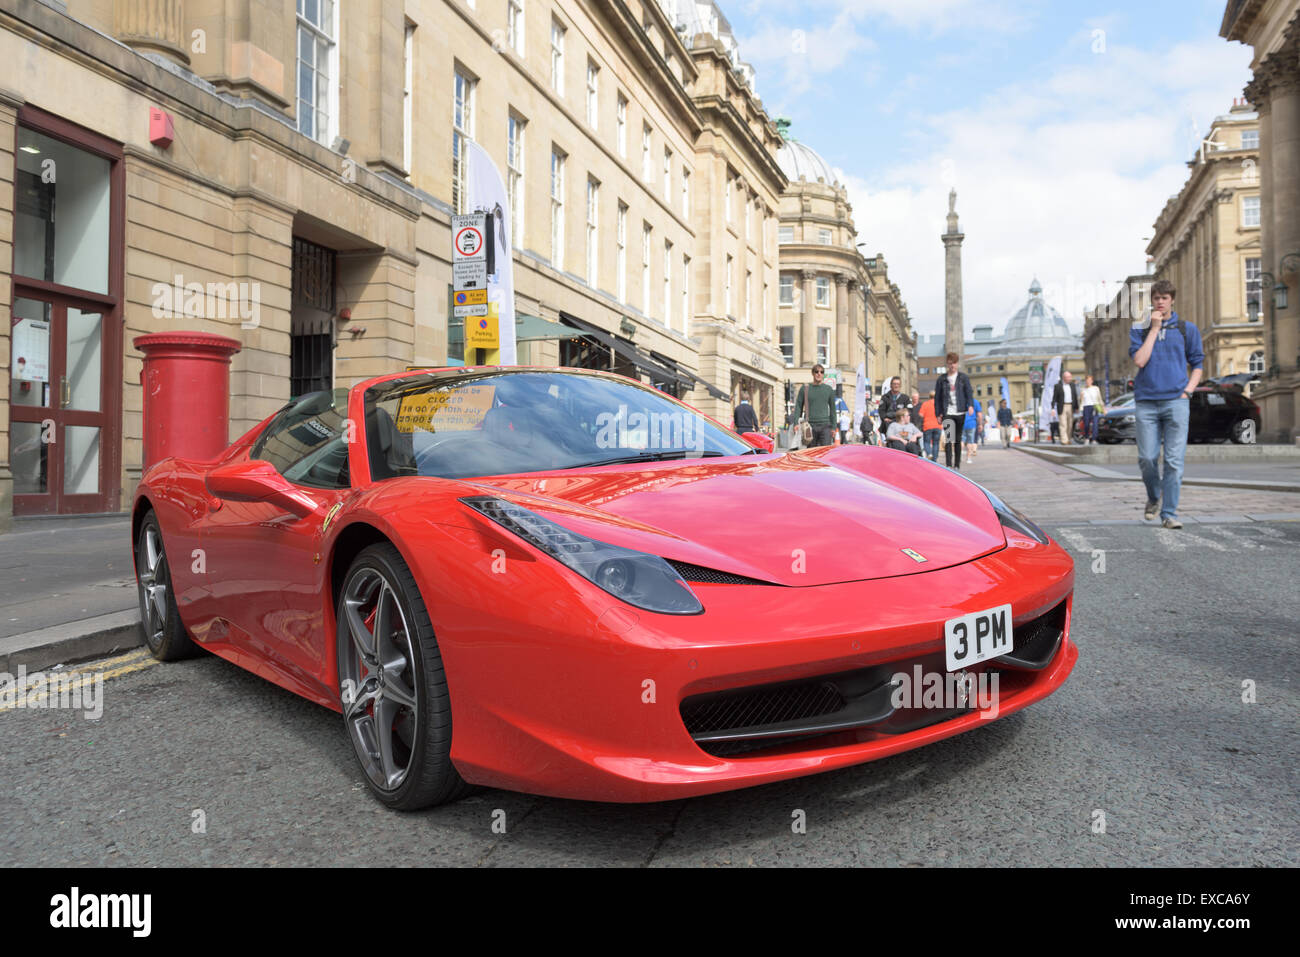 A red Ferrari at the NE1 Newcastle Motor Show car exhibition 11th July 2015 Stock Photo